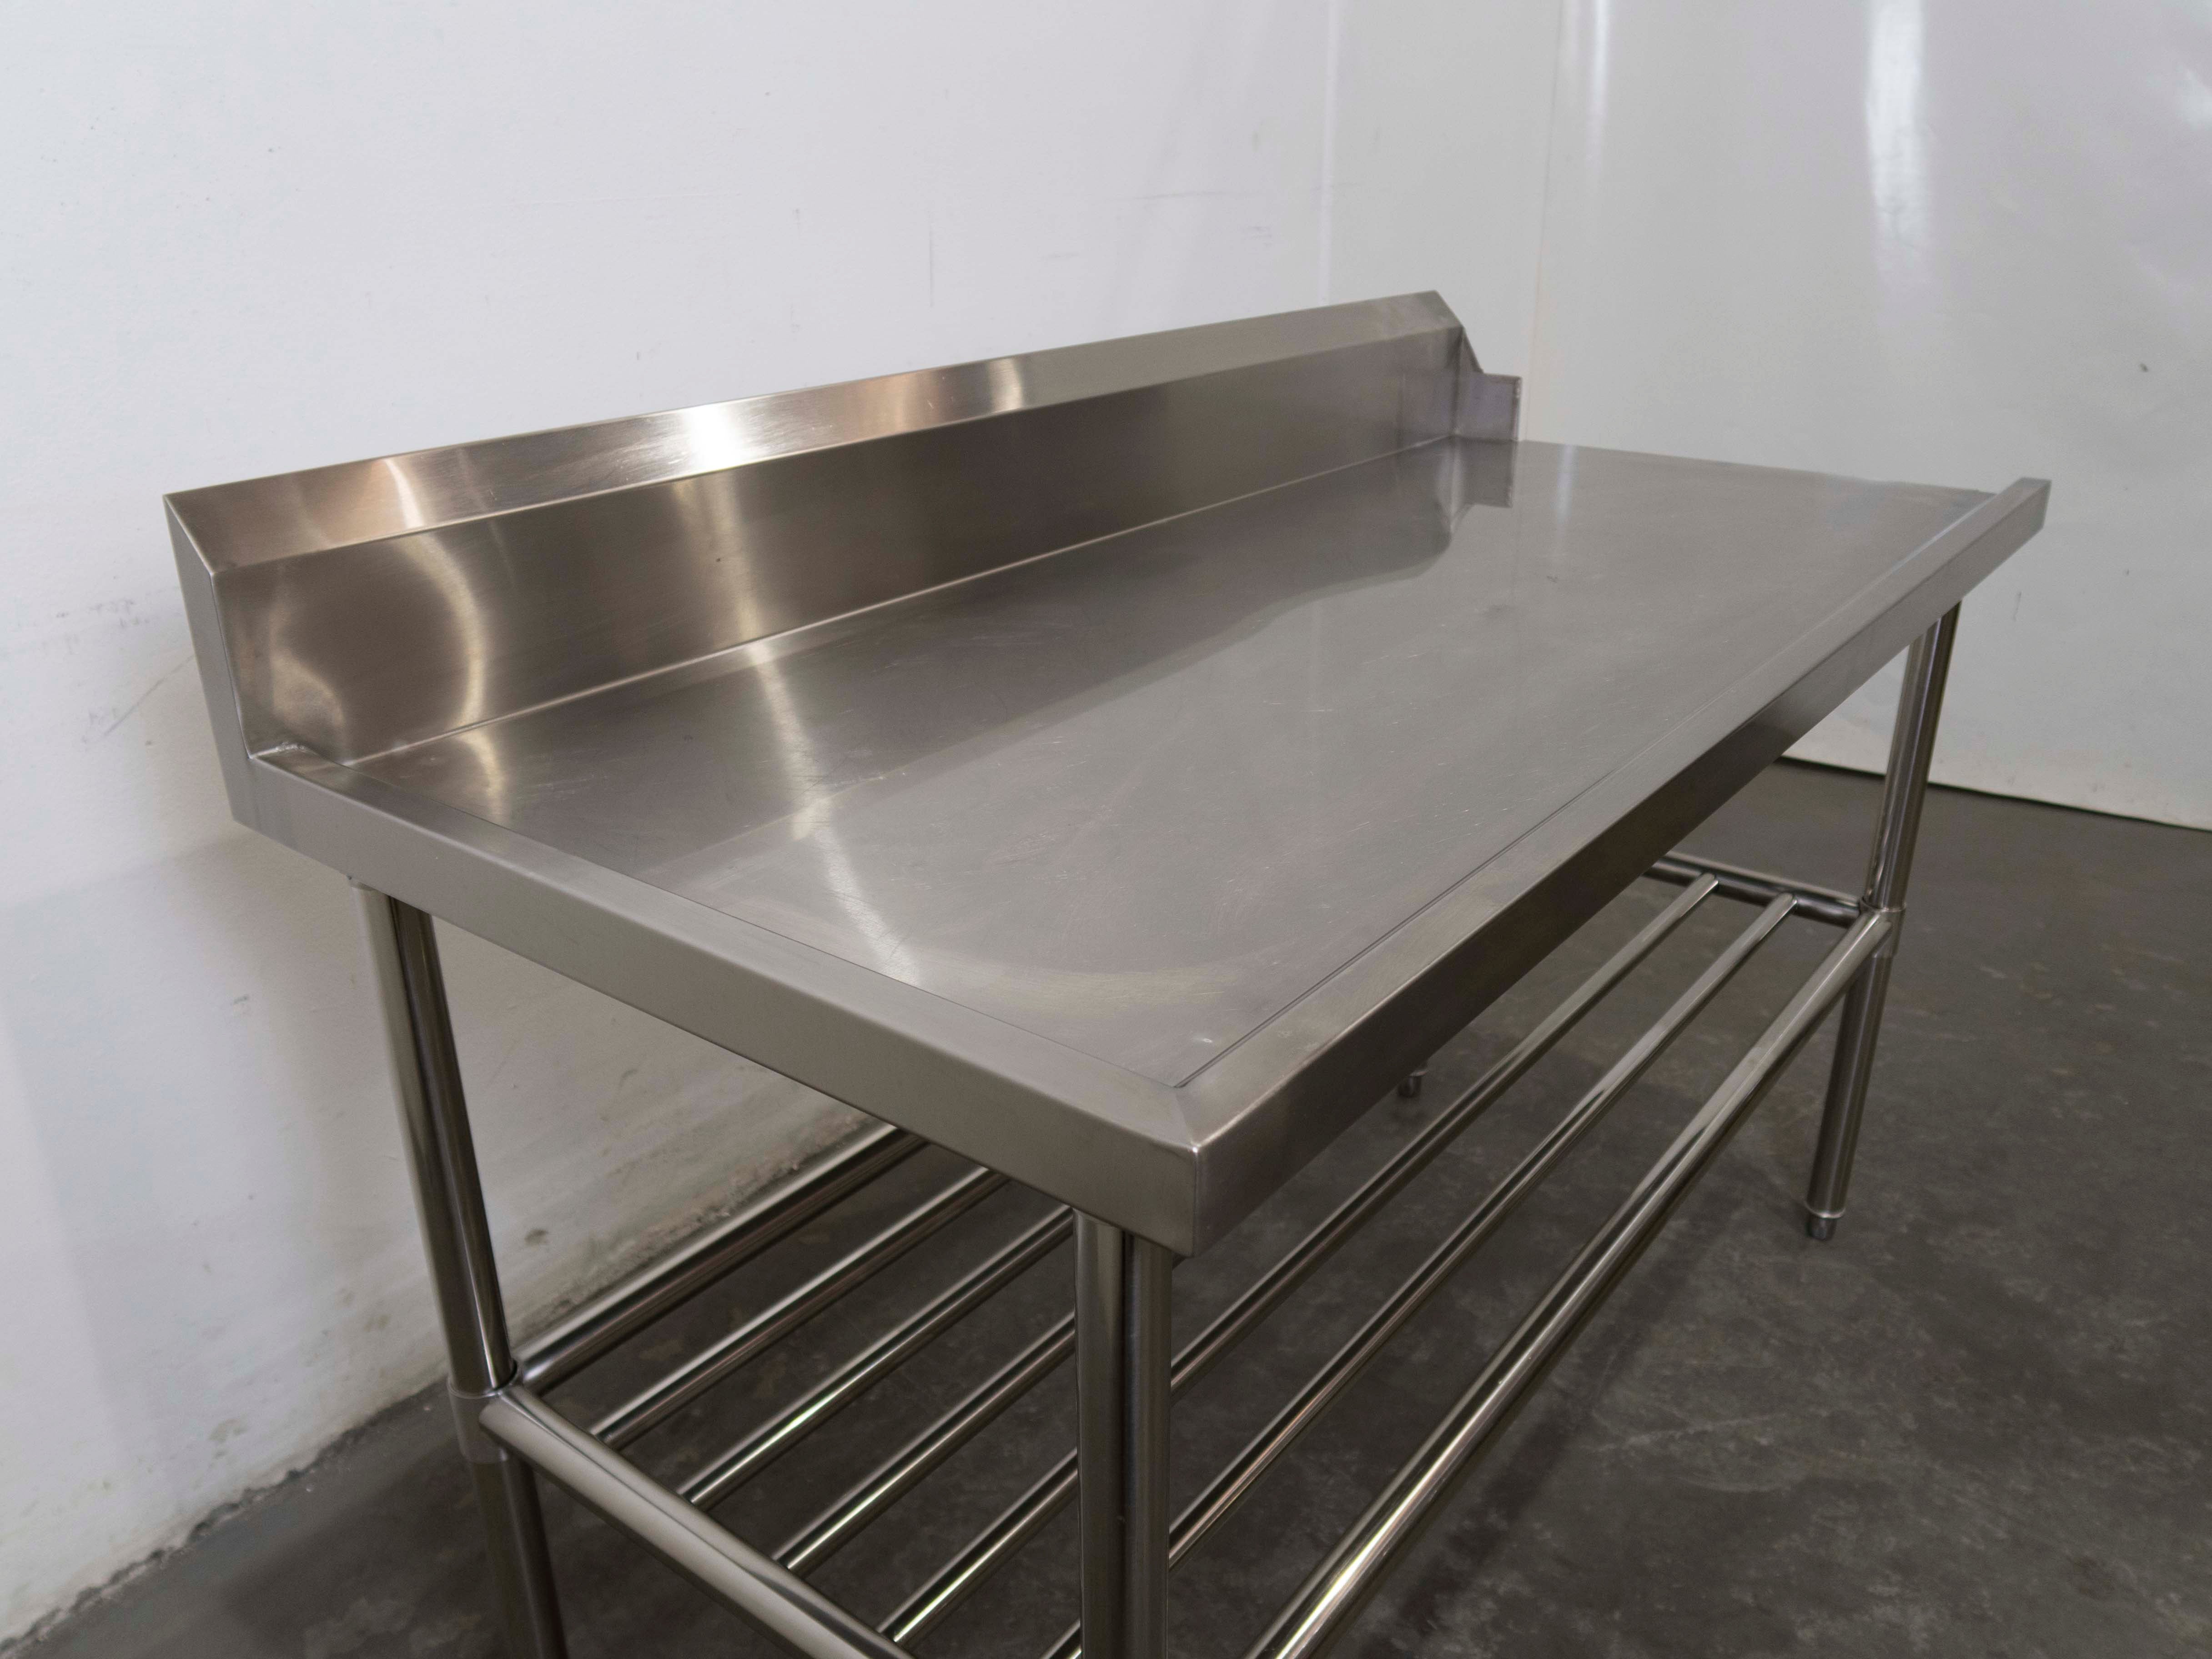 Thumbnail - Stainless Steel Bench with Splashback